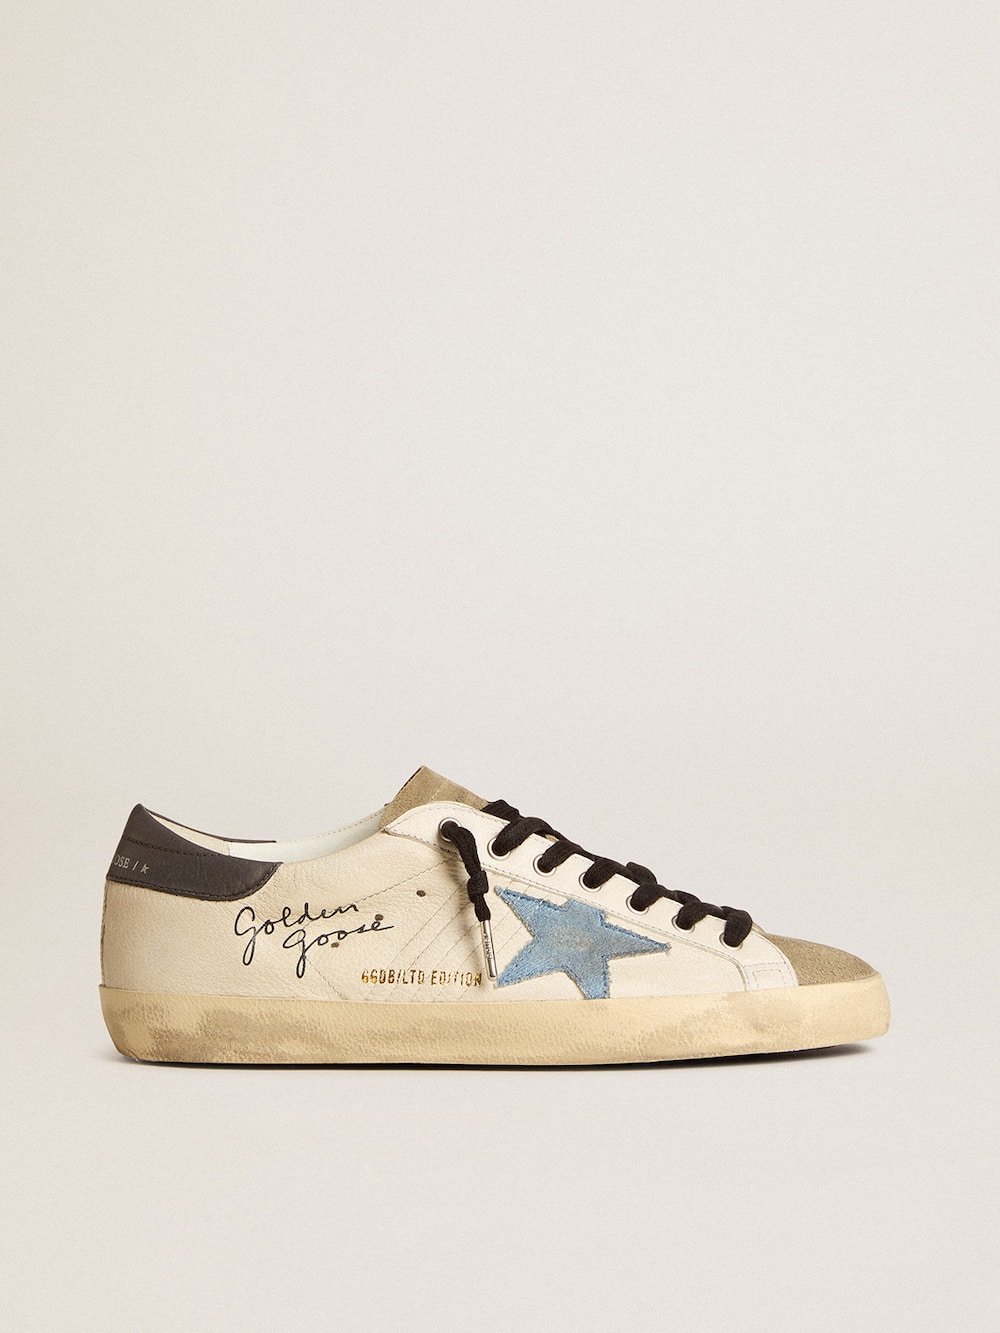 Golden Goose - Men's Super-Star LTD in nappa with denim star and gray leather heel tab in 